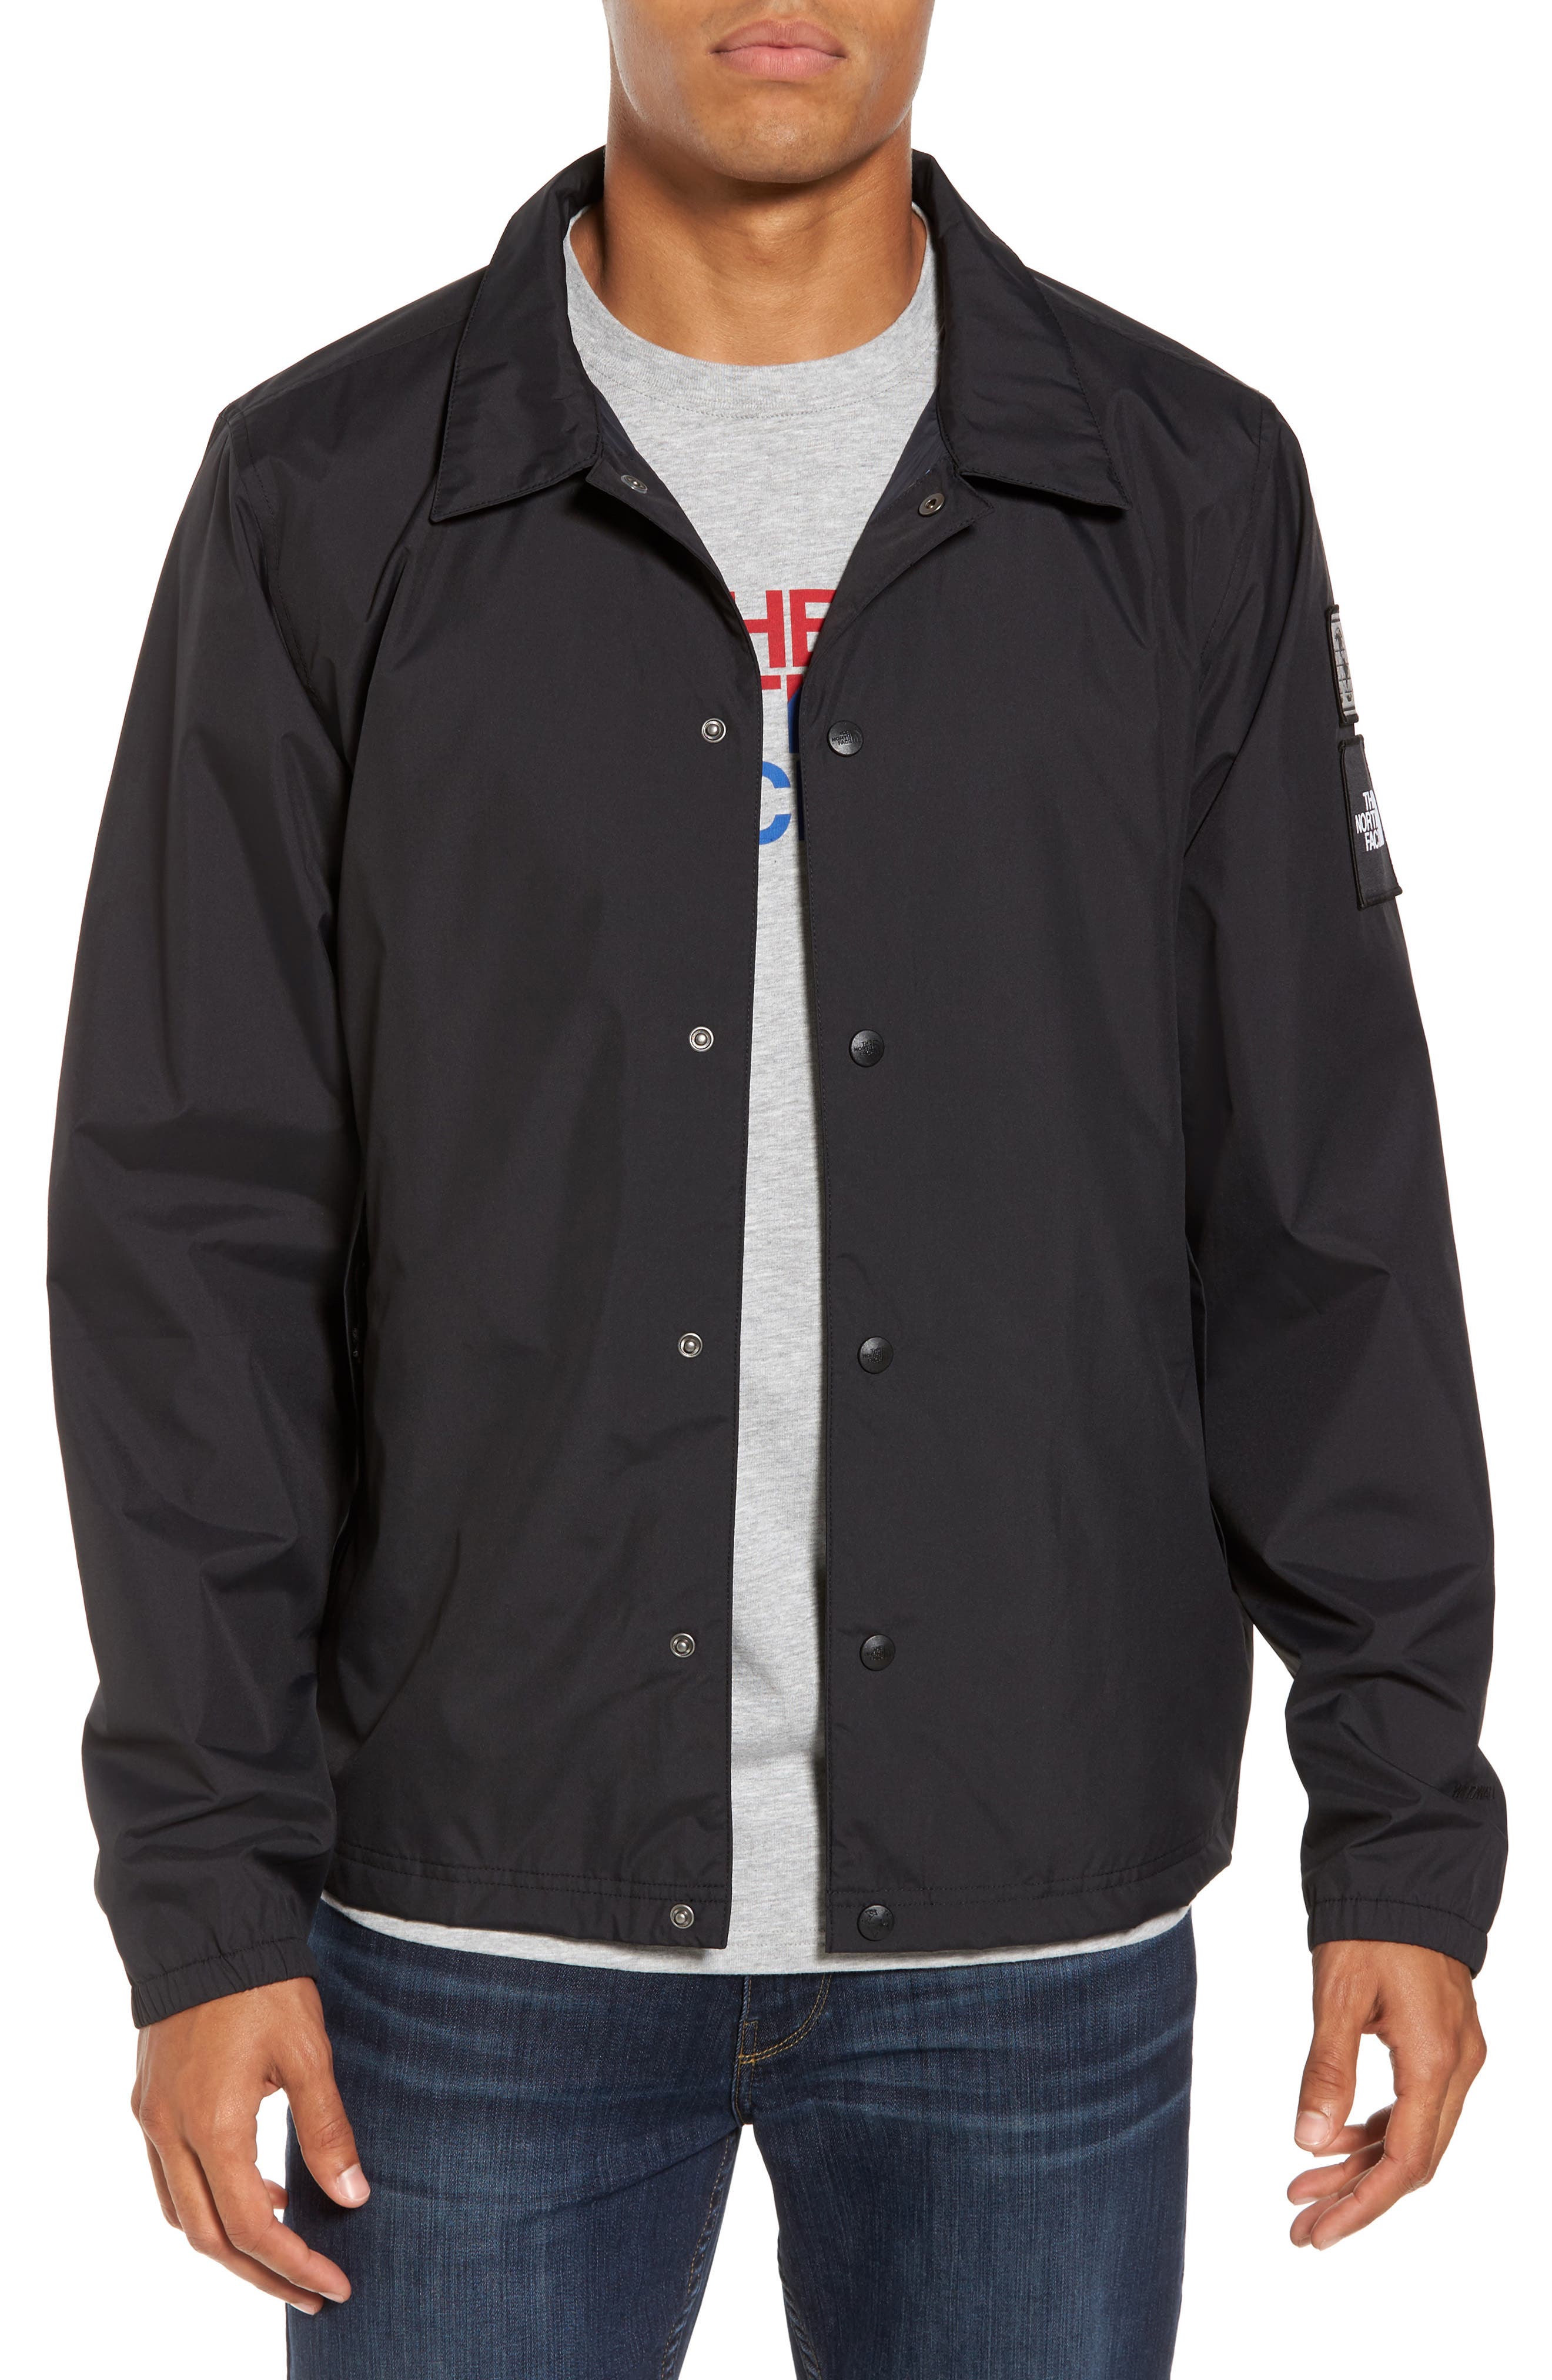 North Face Long Coaches Jacket Flash Sales, 56% OFF | www ...